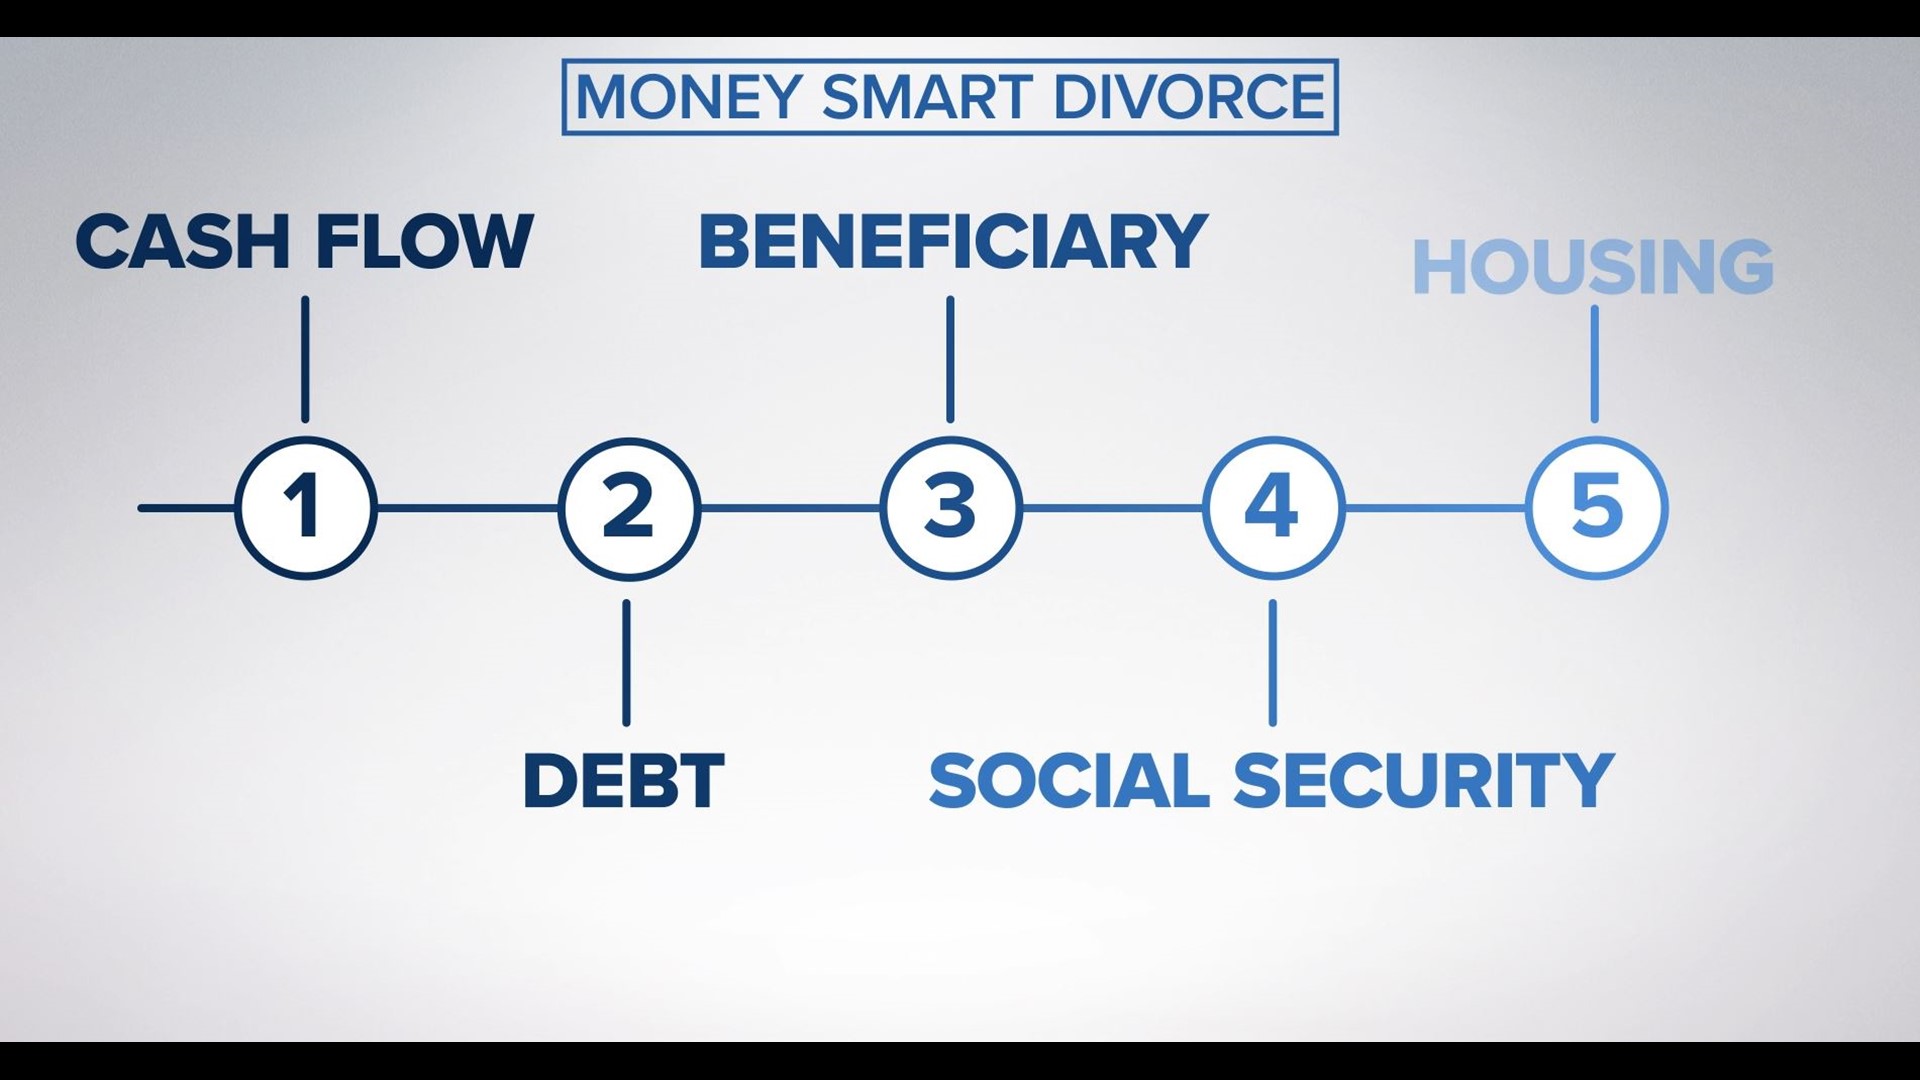 A divorce can be one of life’s most stressful events. Here are 5 things to consider to navigate the process and avoid further financial heartbreak.